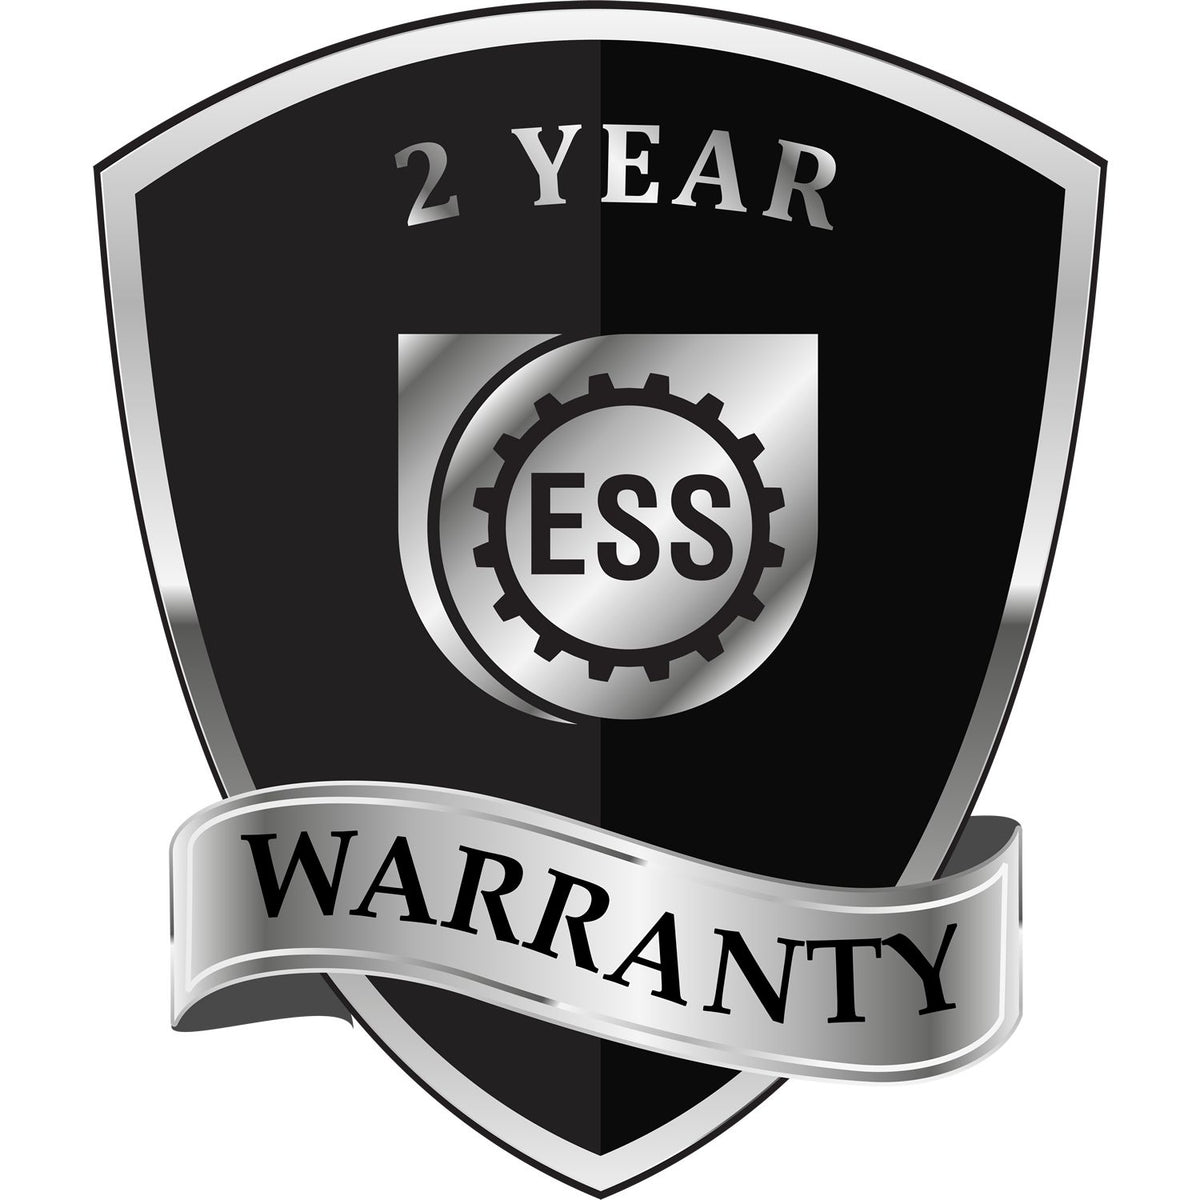 A badge or emblem showing a warranty icon for the Long Reach Maine PE Seal